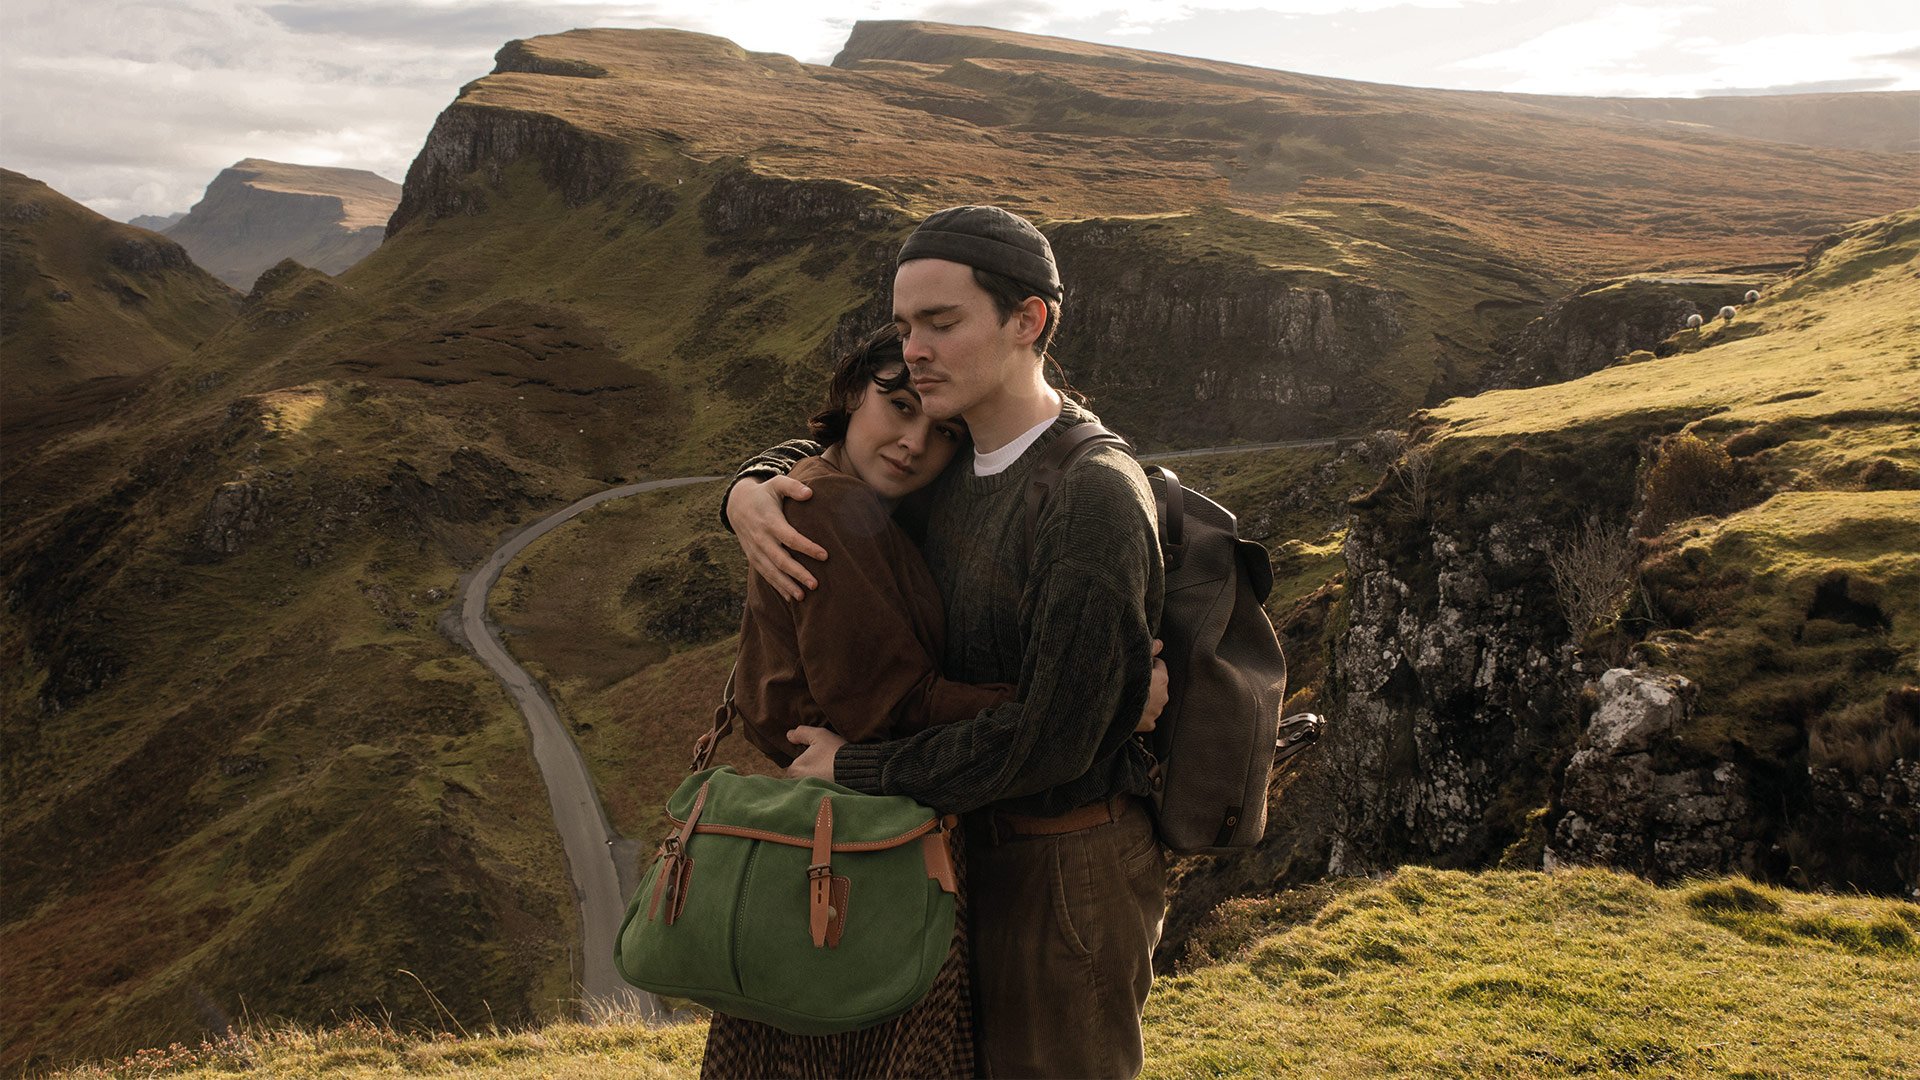 In a mountainous landscape, a man is carrying a leather backpack and a woman is carrying a suede pouch. The two give each other a hug.